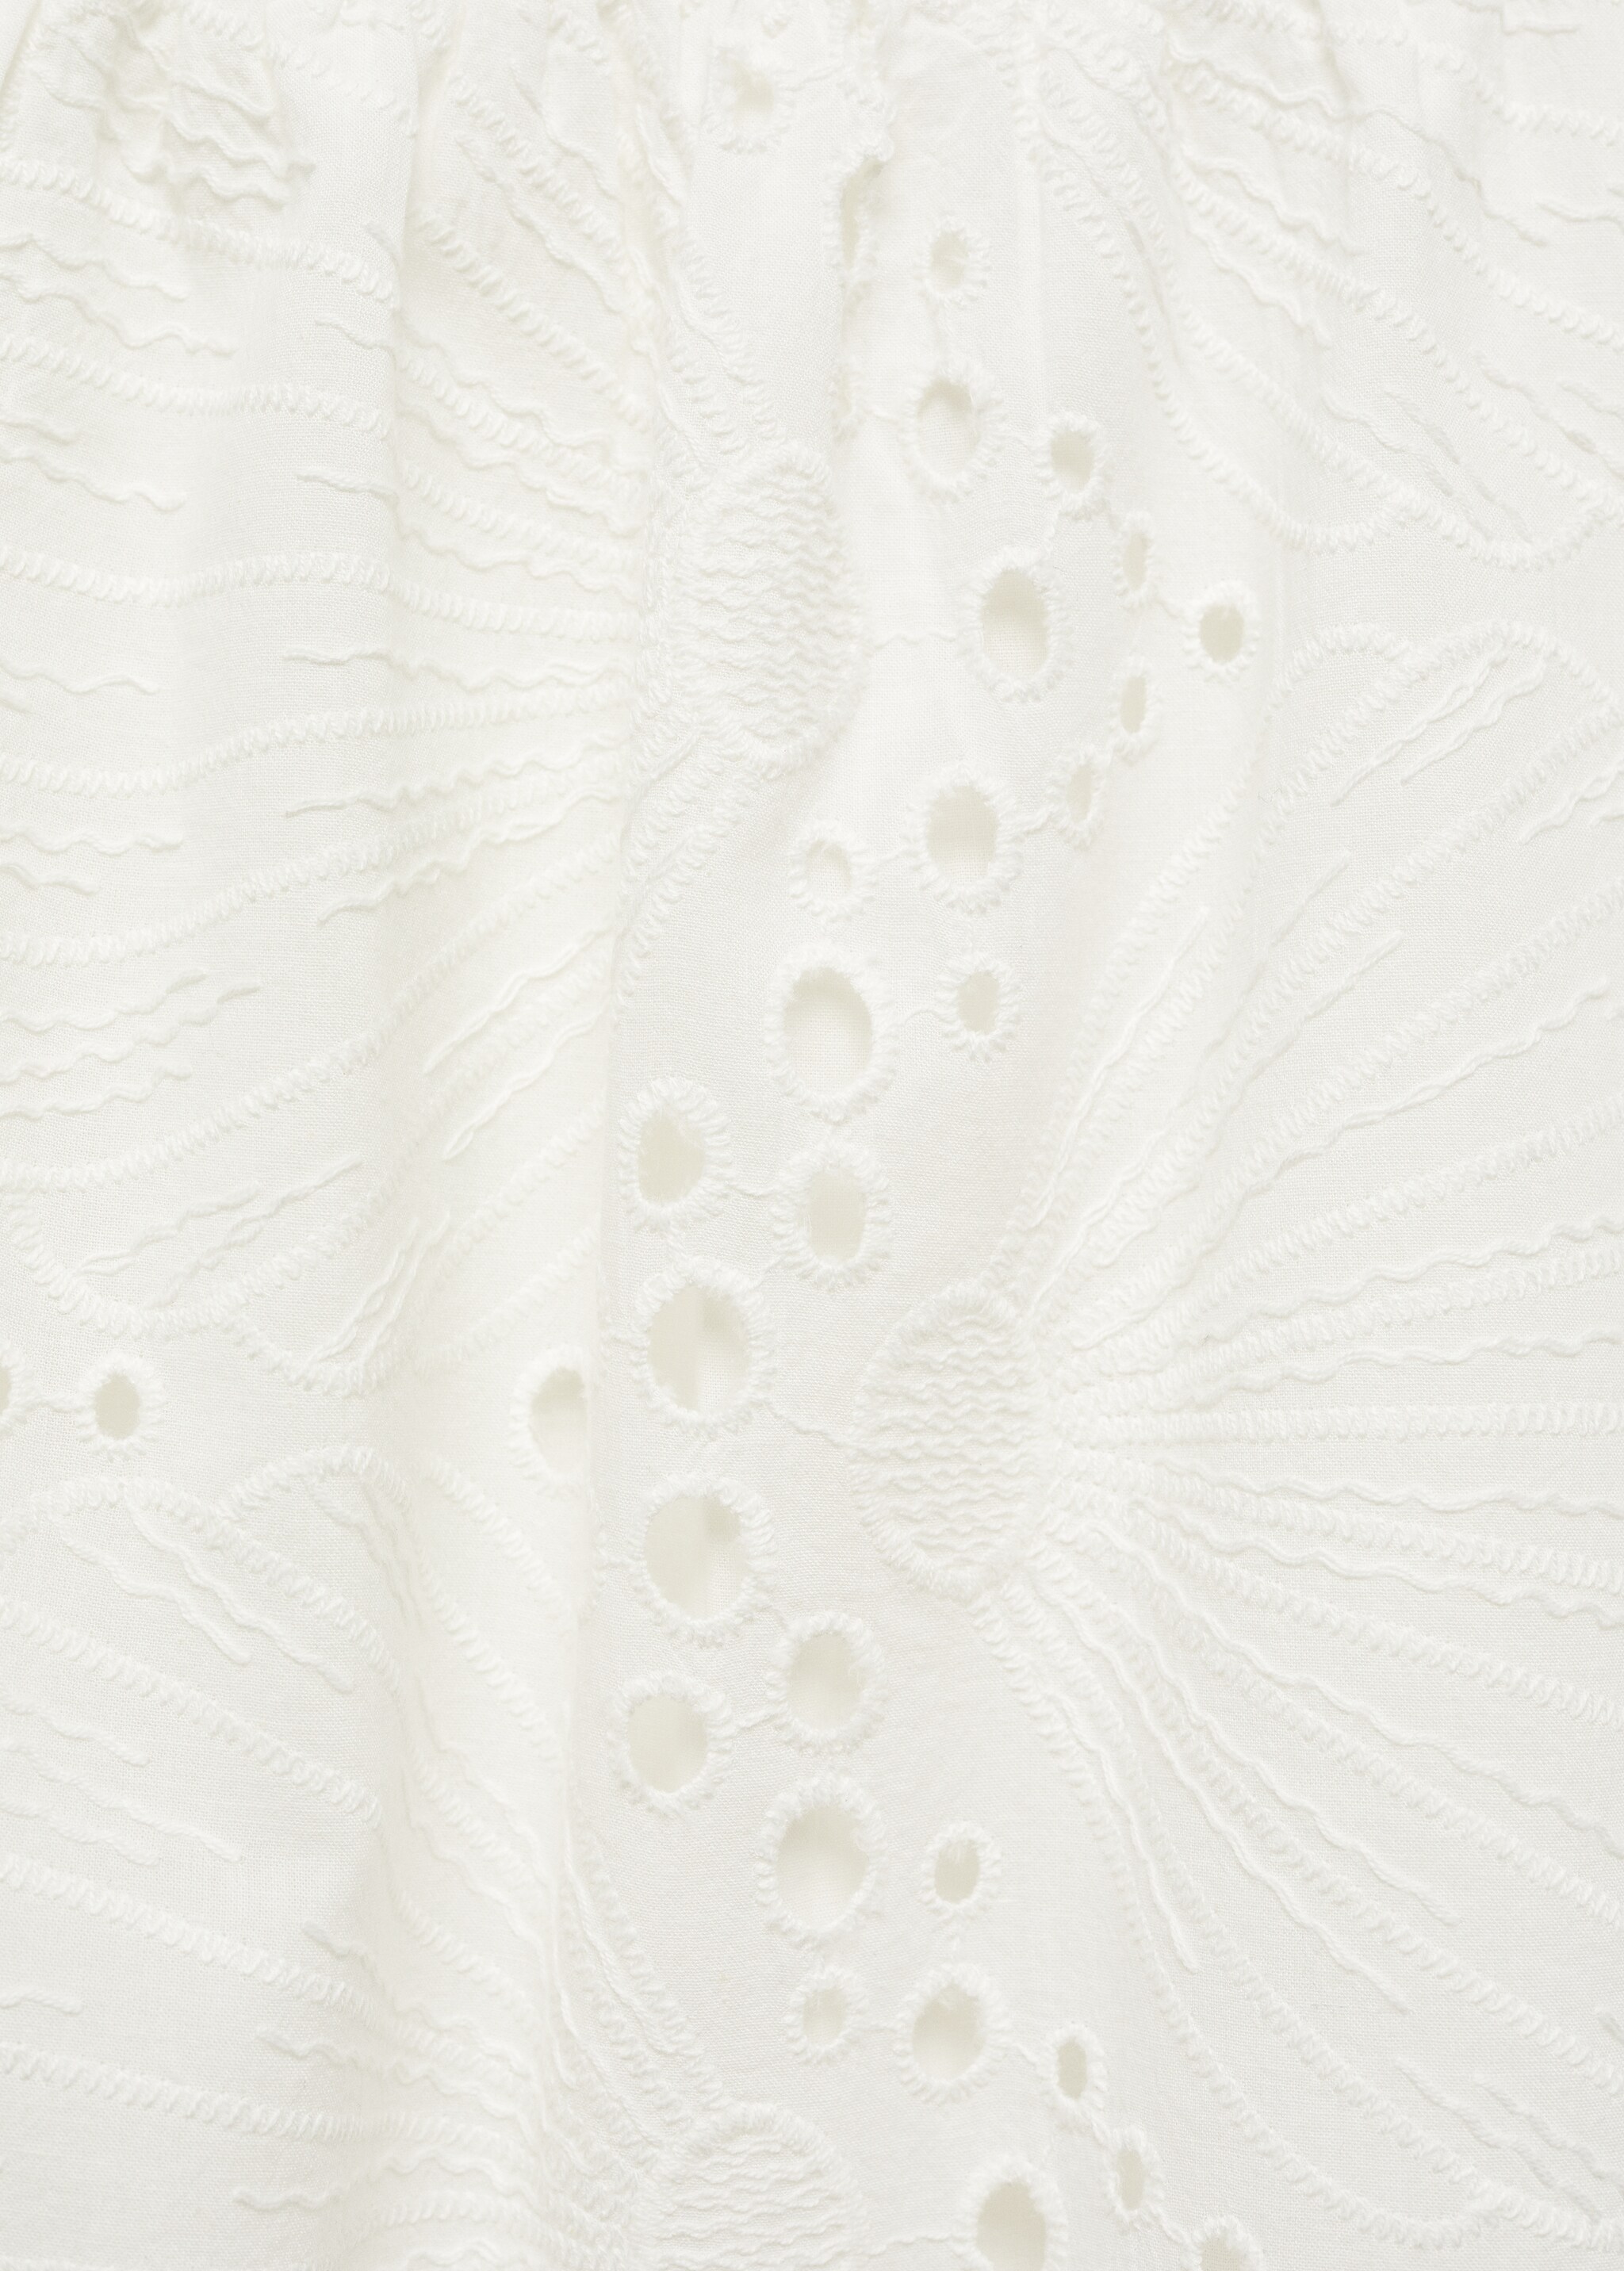 Embroidered openwork dress - Details of the article 8